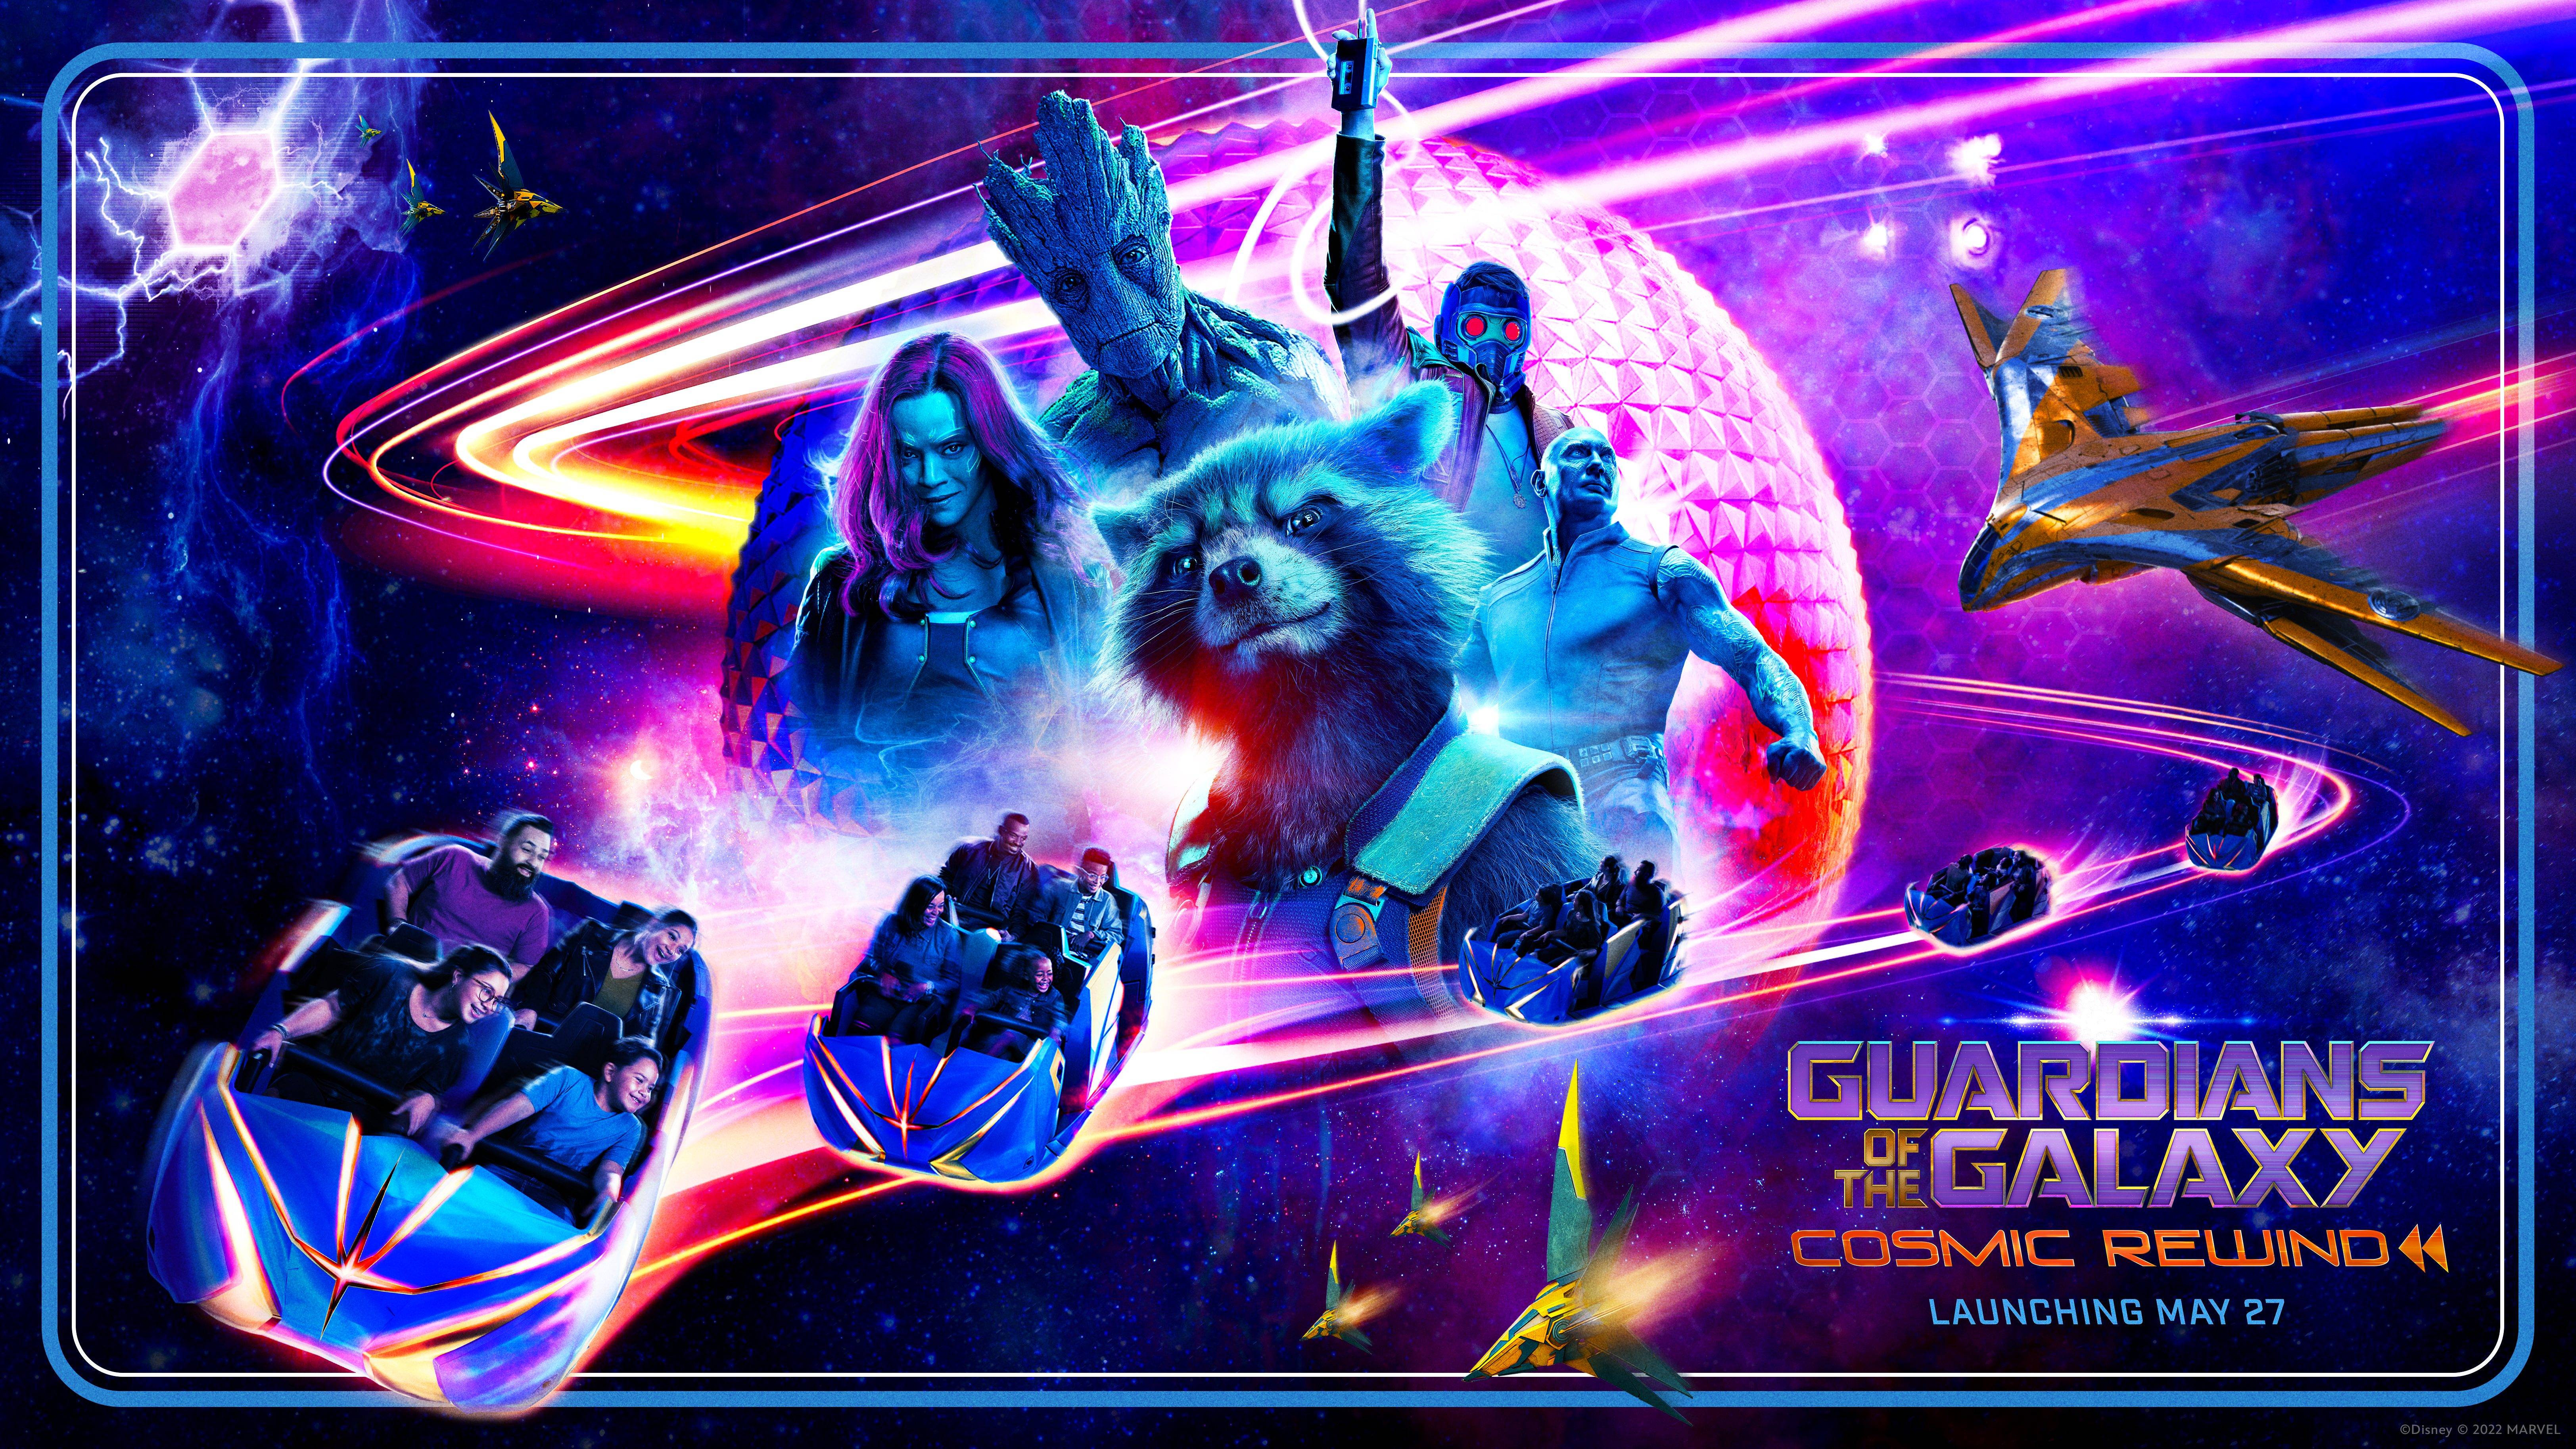 Disney launches new 'Guardians of the Galaxy Cosmic Rewind' opening date countdown on official website